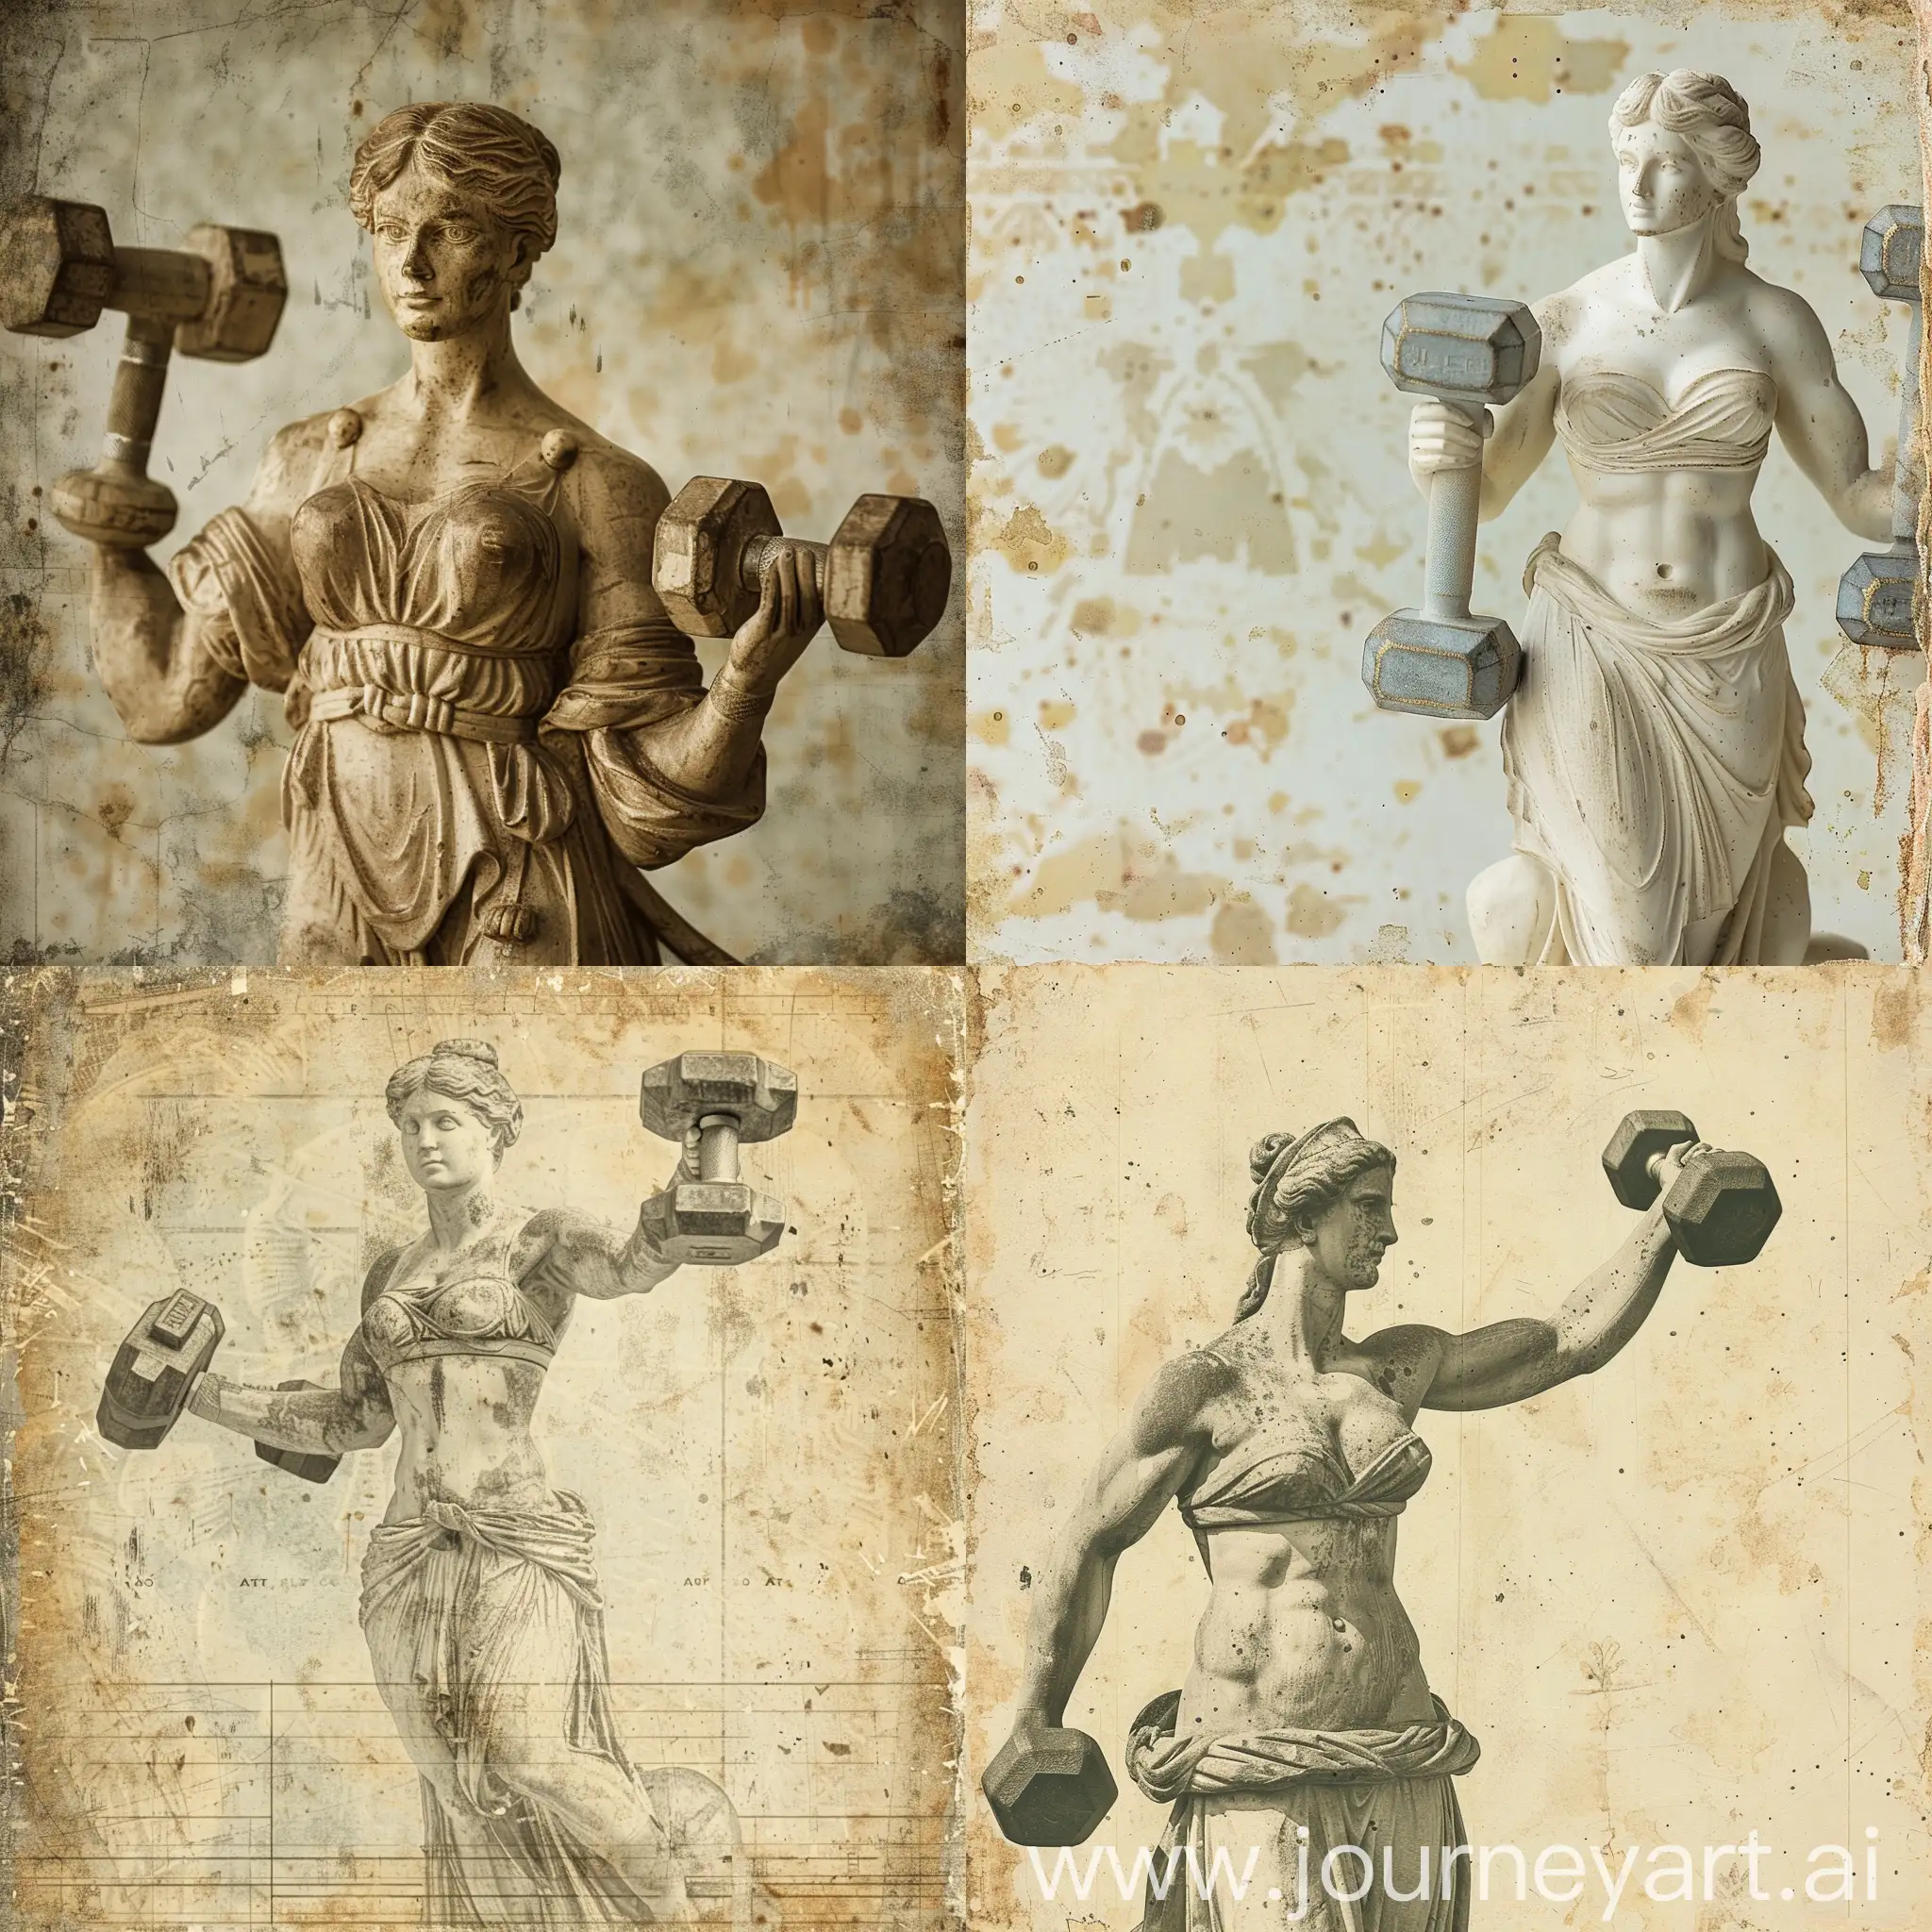 VintageInspired-Greek-Goddess-Sculpture-Engaged-in-a-Workout-with-Dumbbells